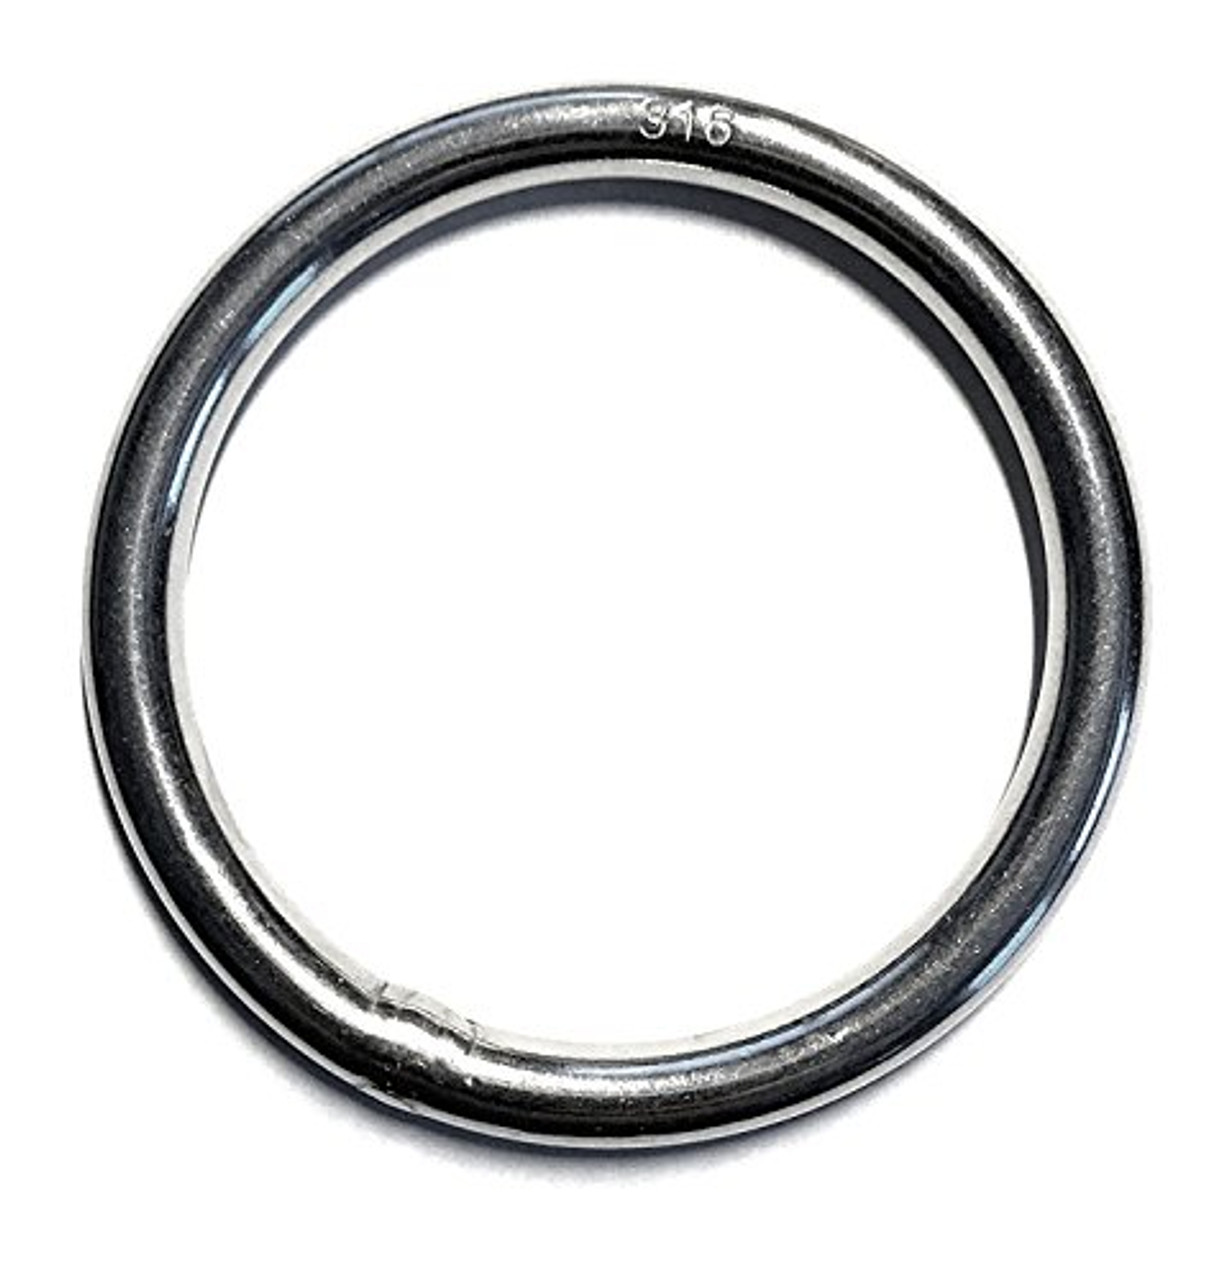 Metal O Rings 2 Inch Stainless Steel Round Ring Welded Marine Grade,2pk  (5mmx50mm)